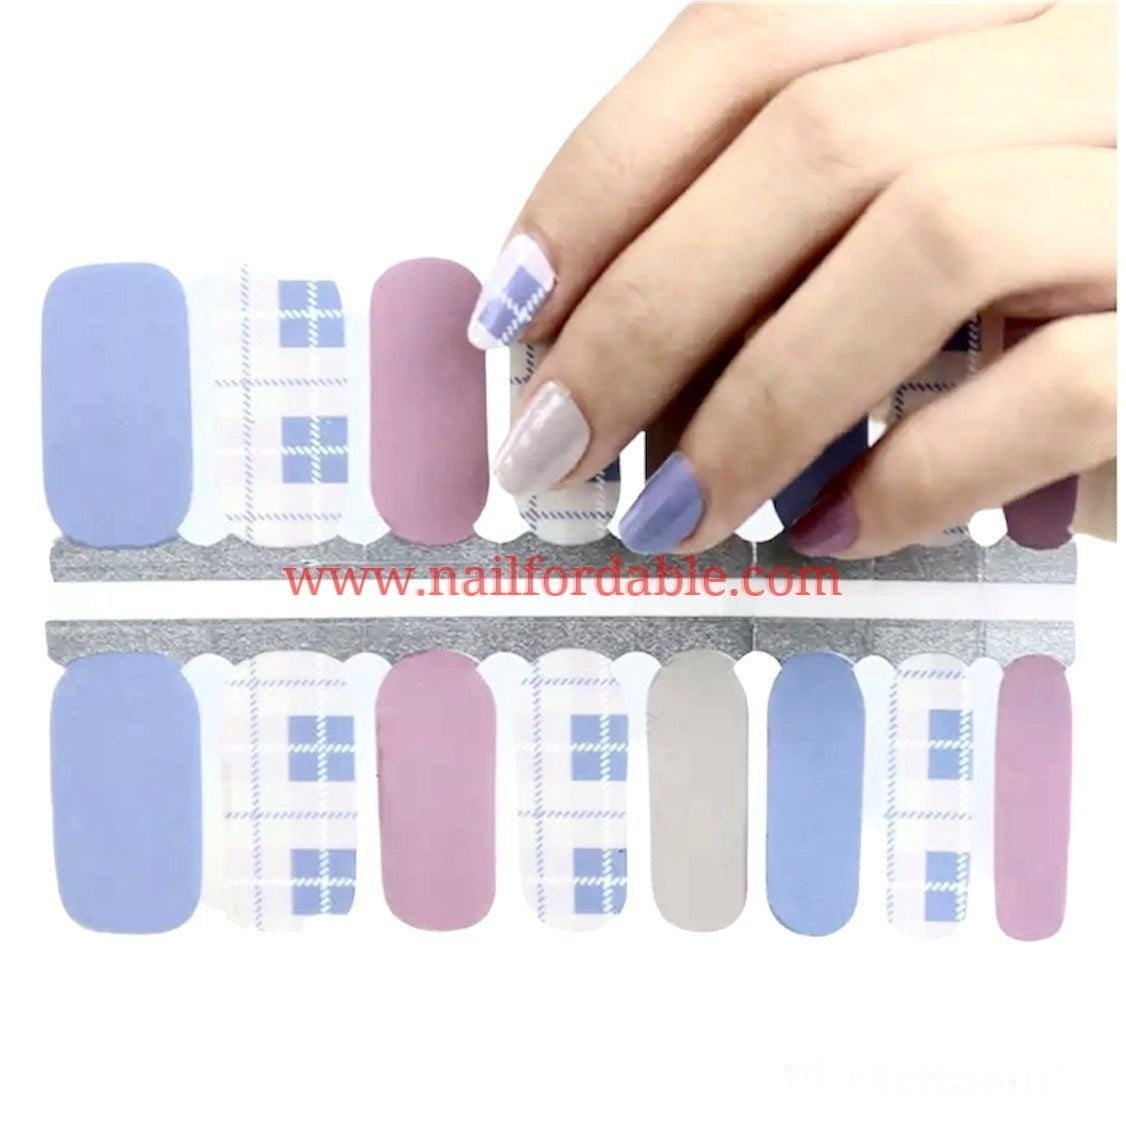 Plaid with solids Nail Wraps | Semi Cured Gel Wraps | Gel Nail Wraps |Nail Polish | Nail Stickers